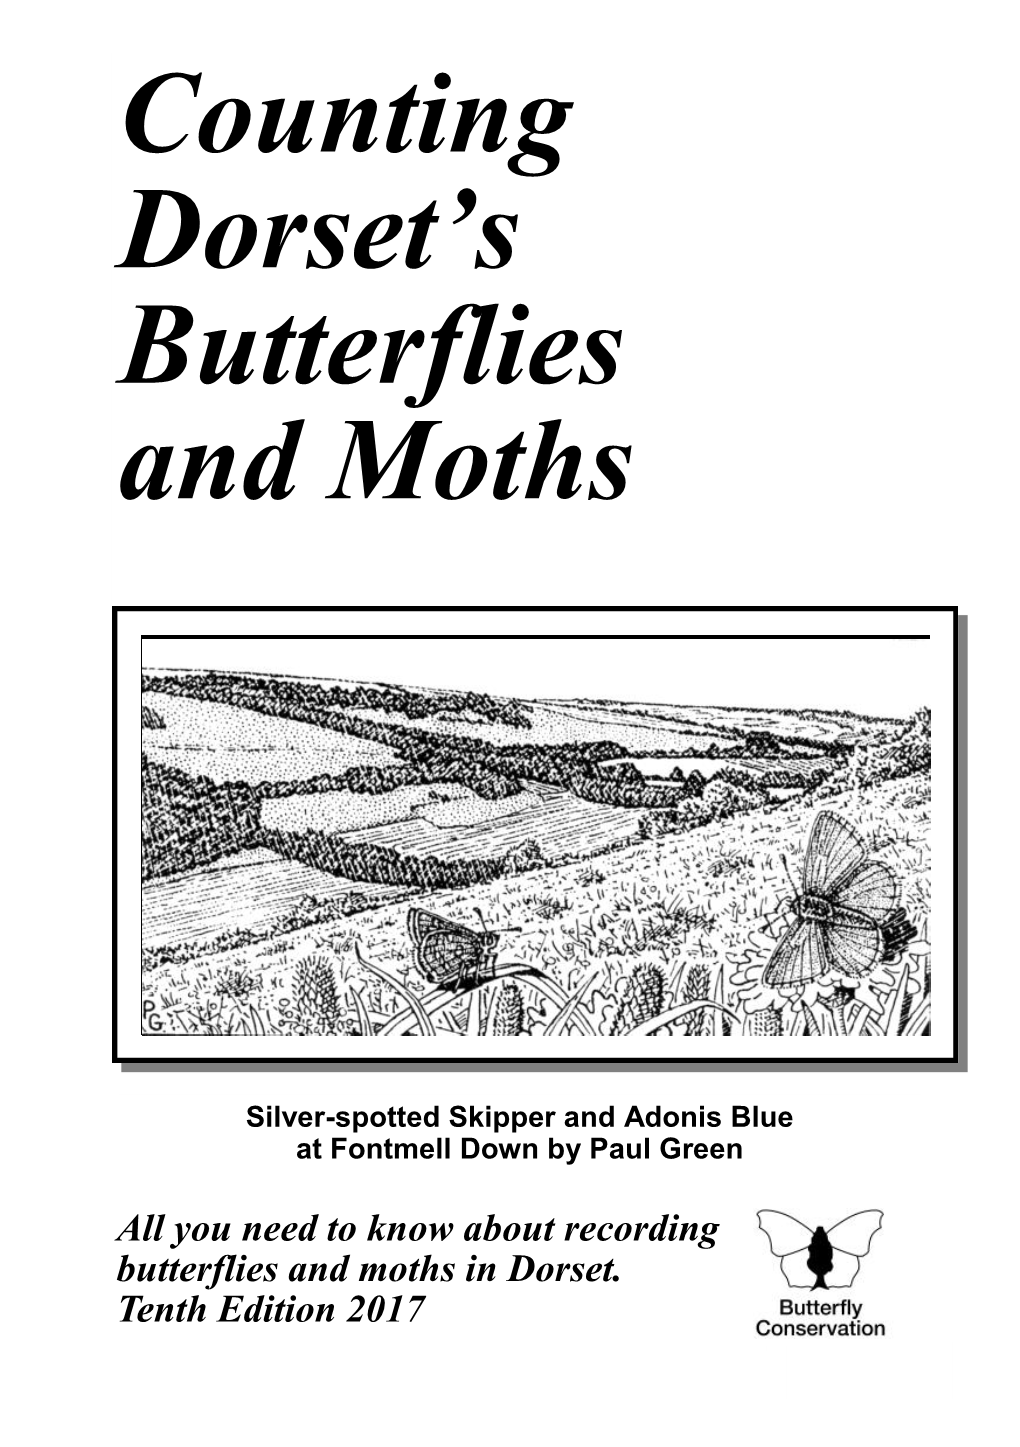 Counting Dorset's Butterflies and Moths